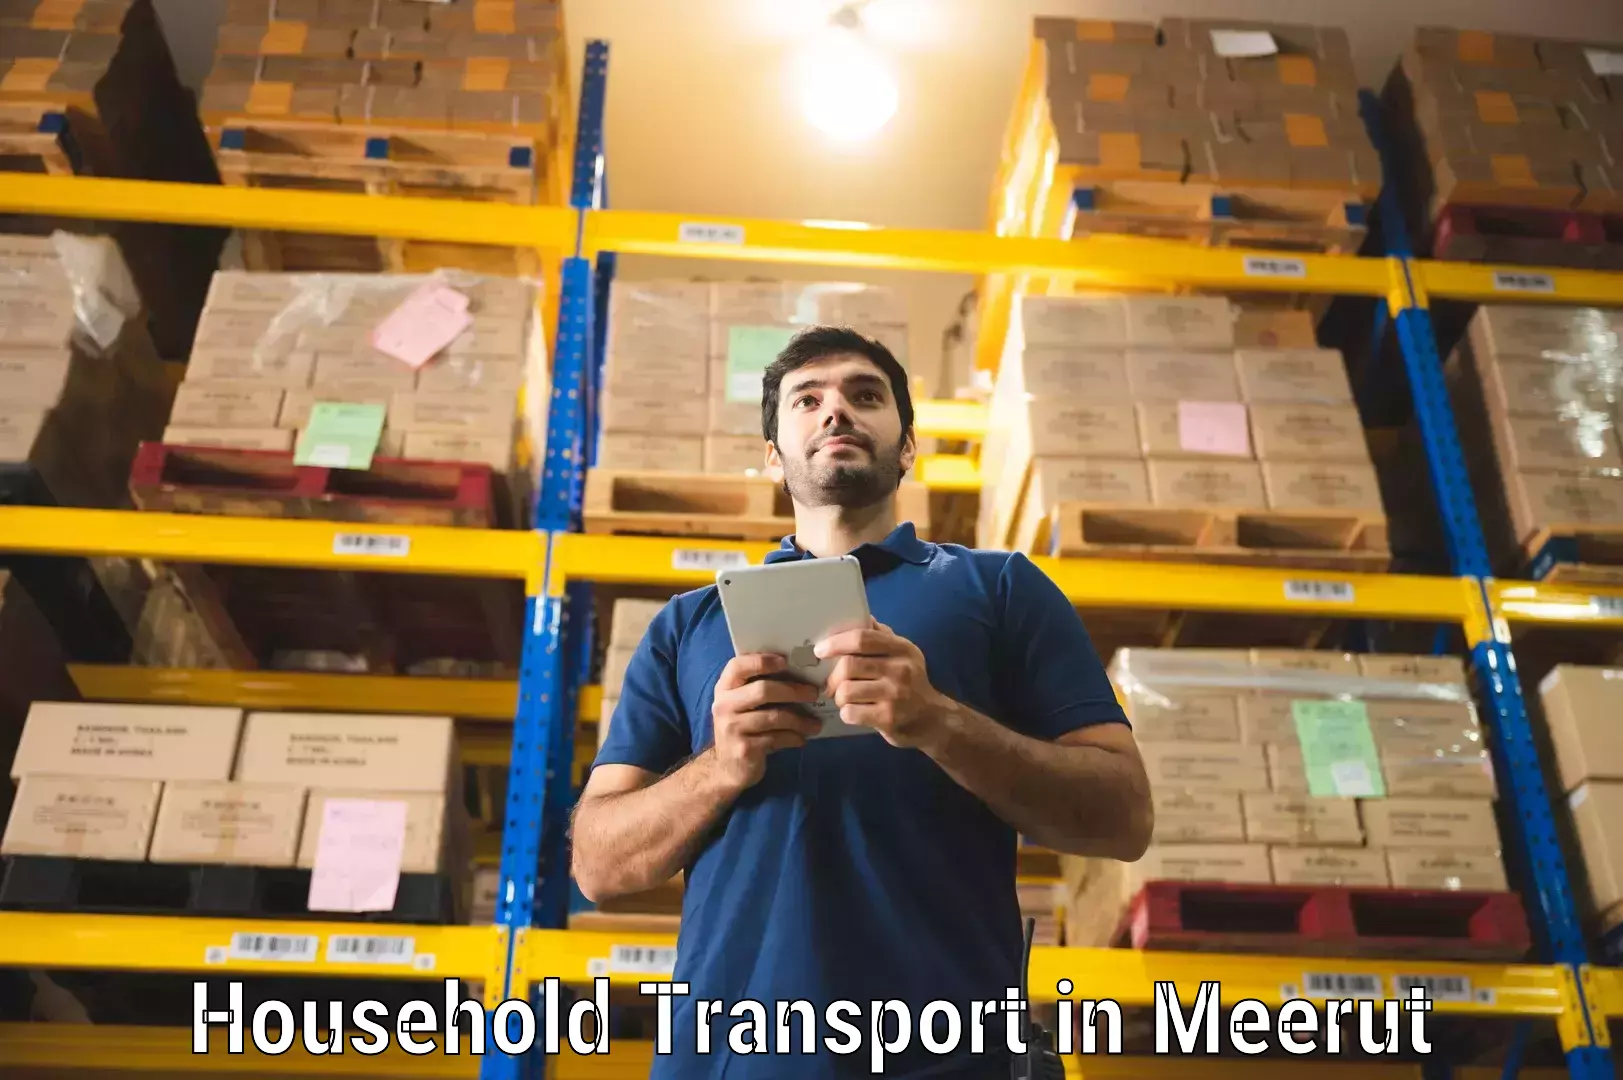 Household transport experts in Meerut